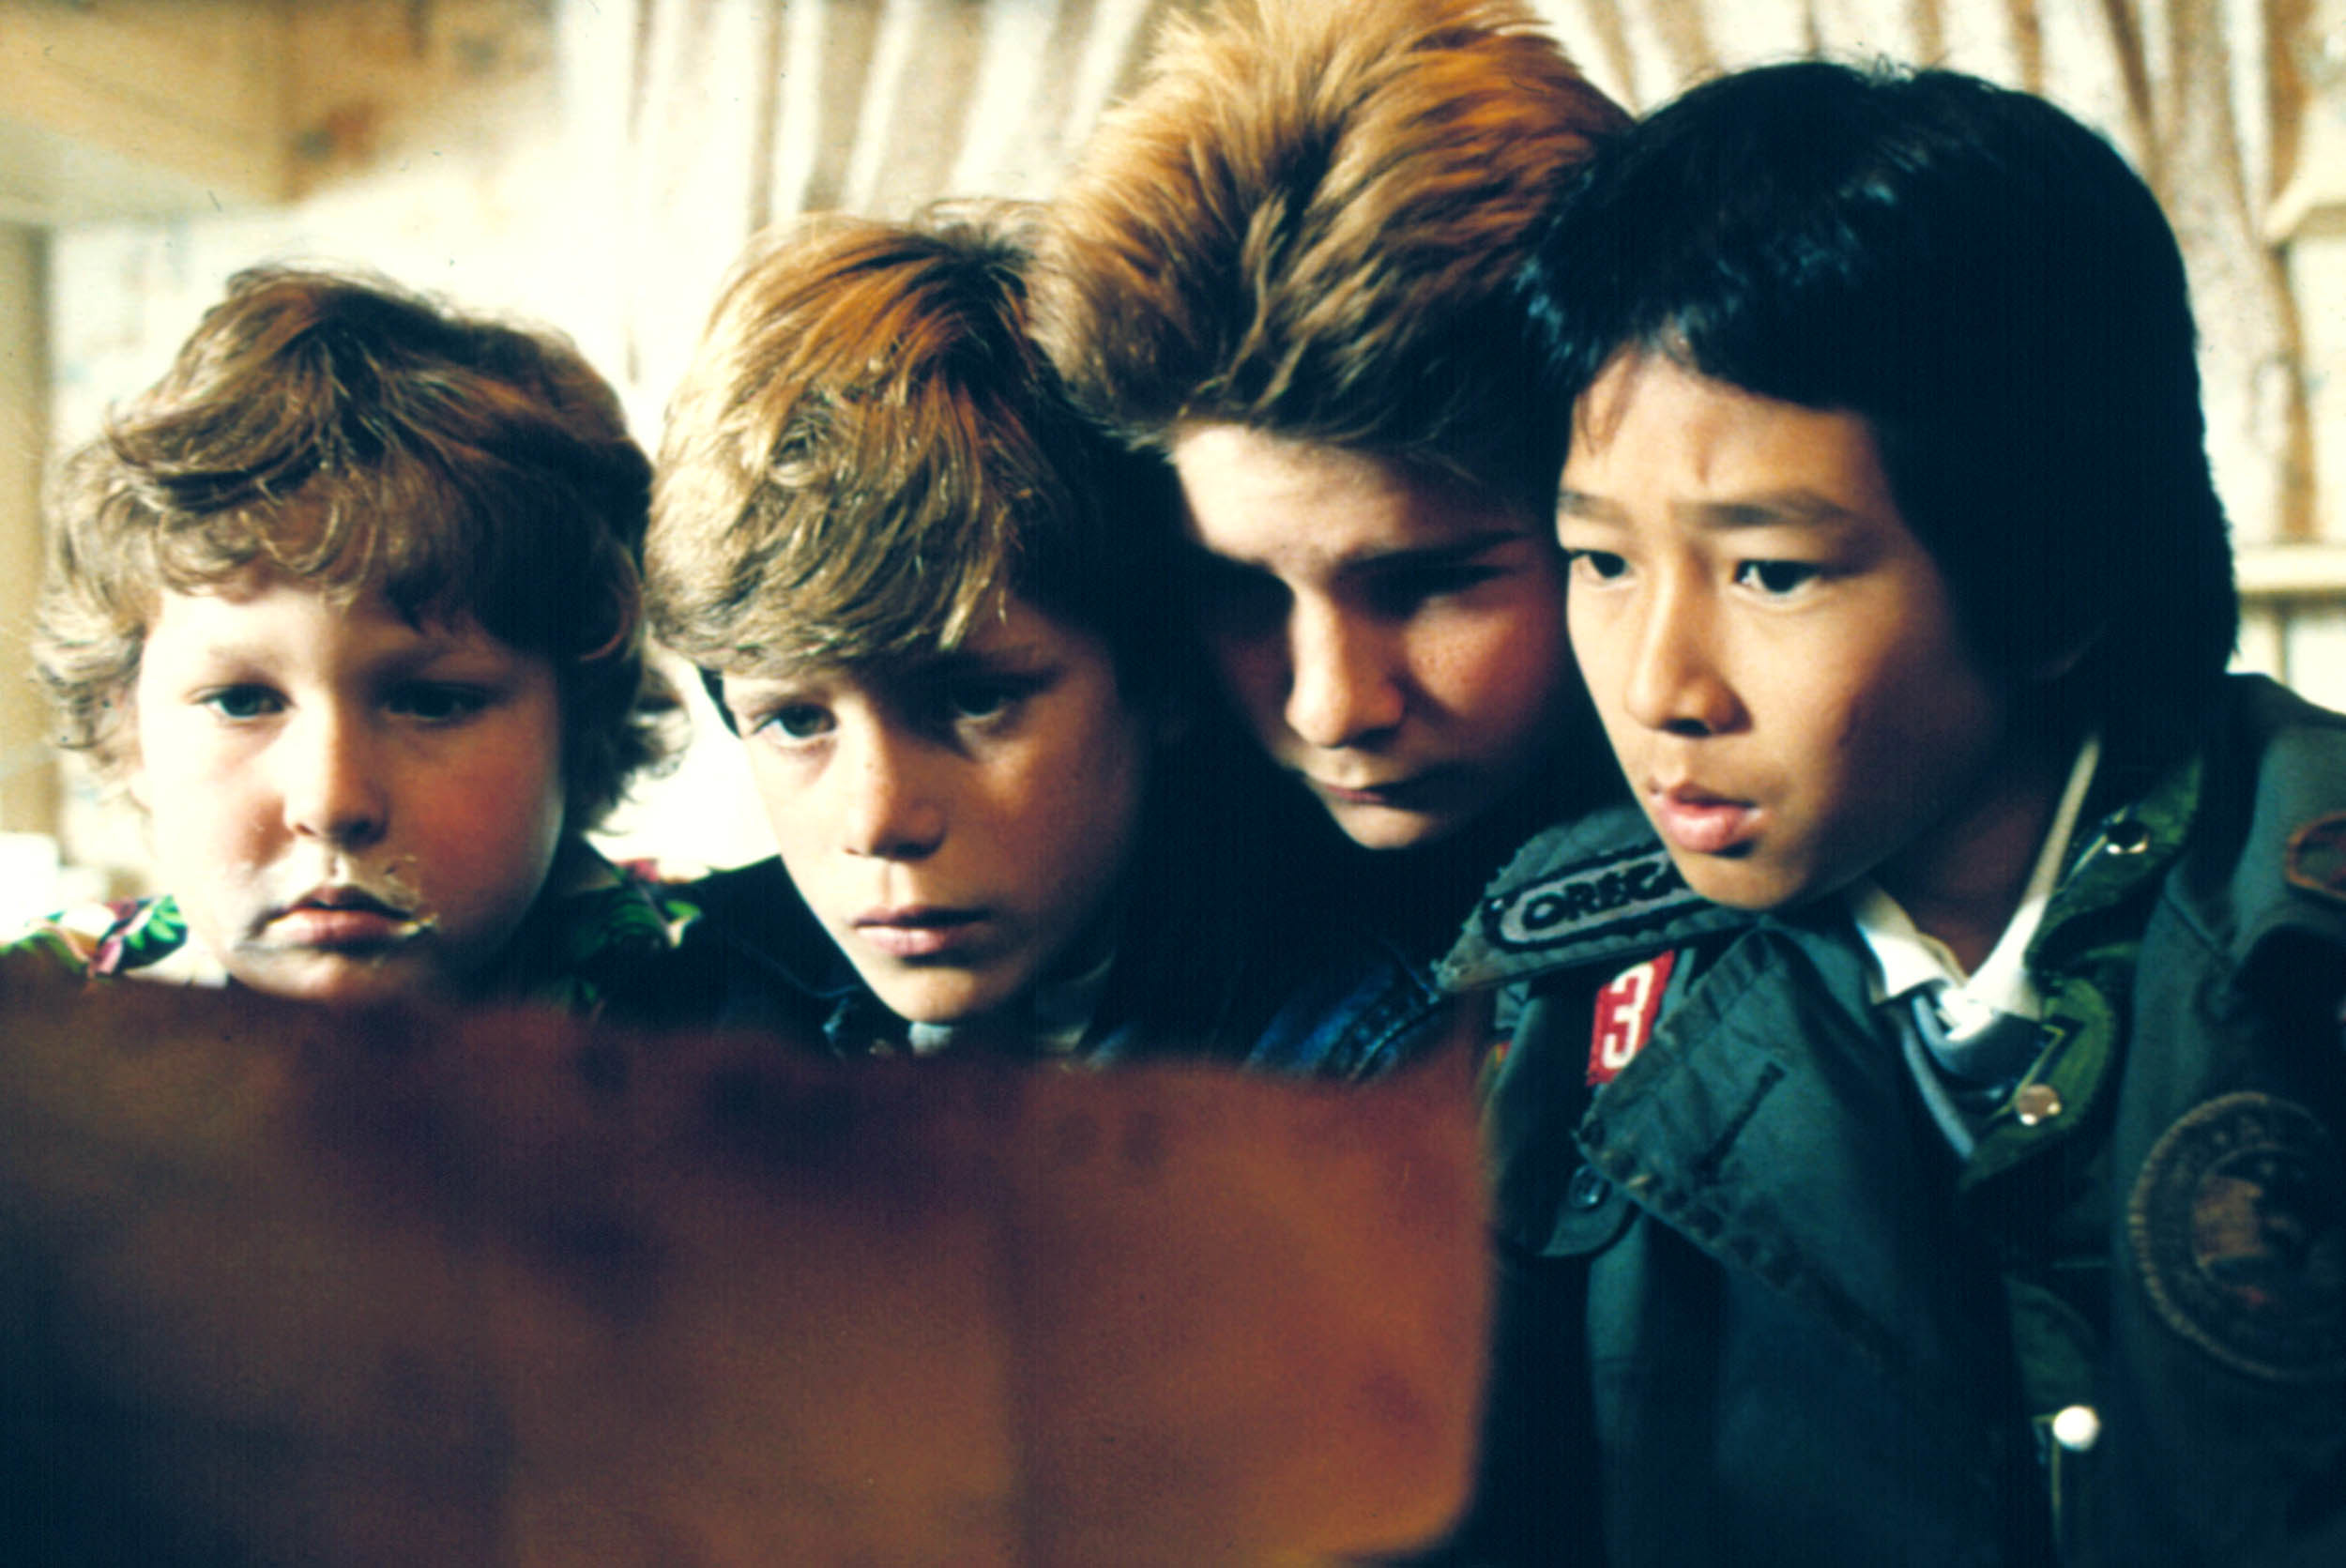 'The Goonies' is back in theaters nearly 40 years after its debut. Here